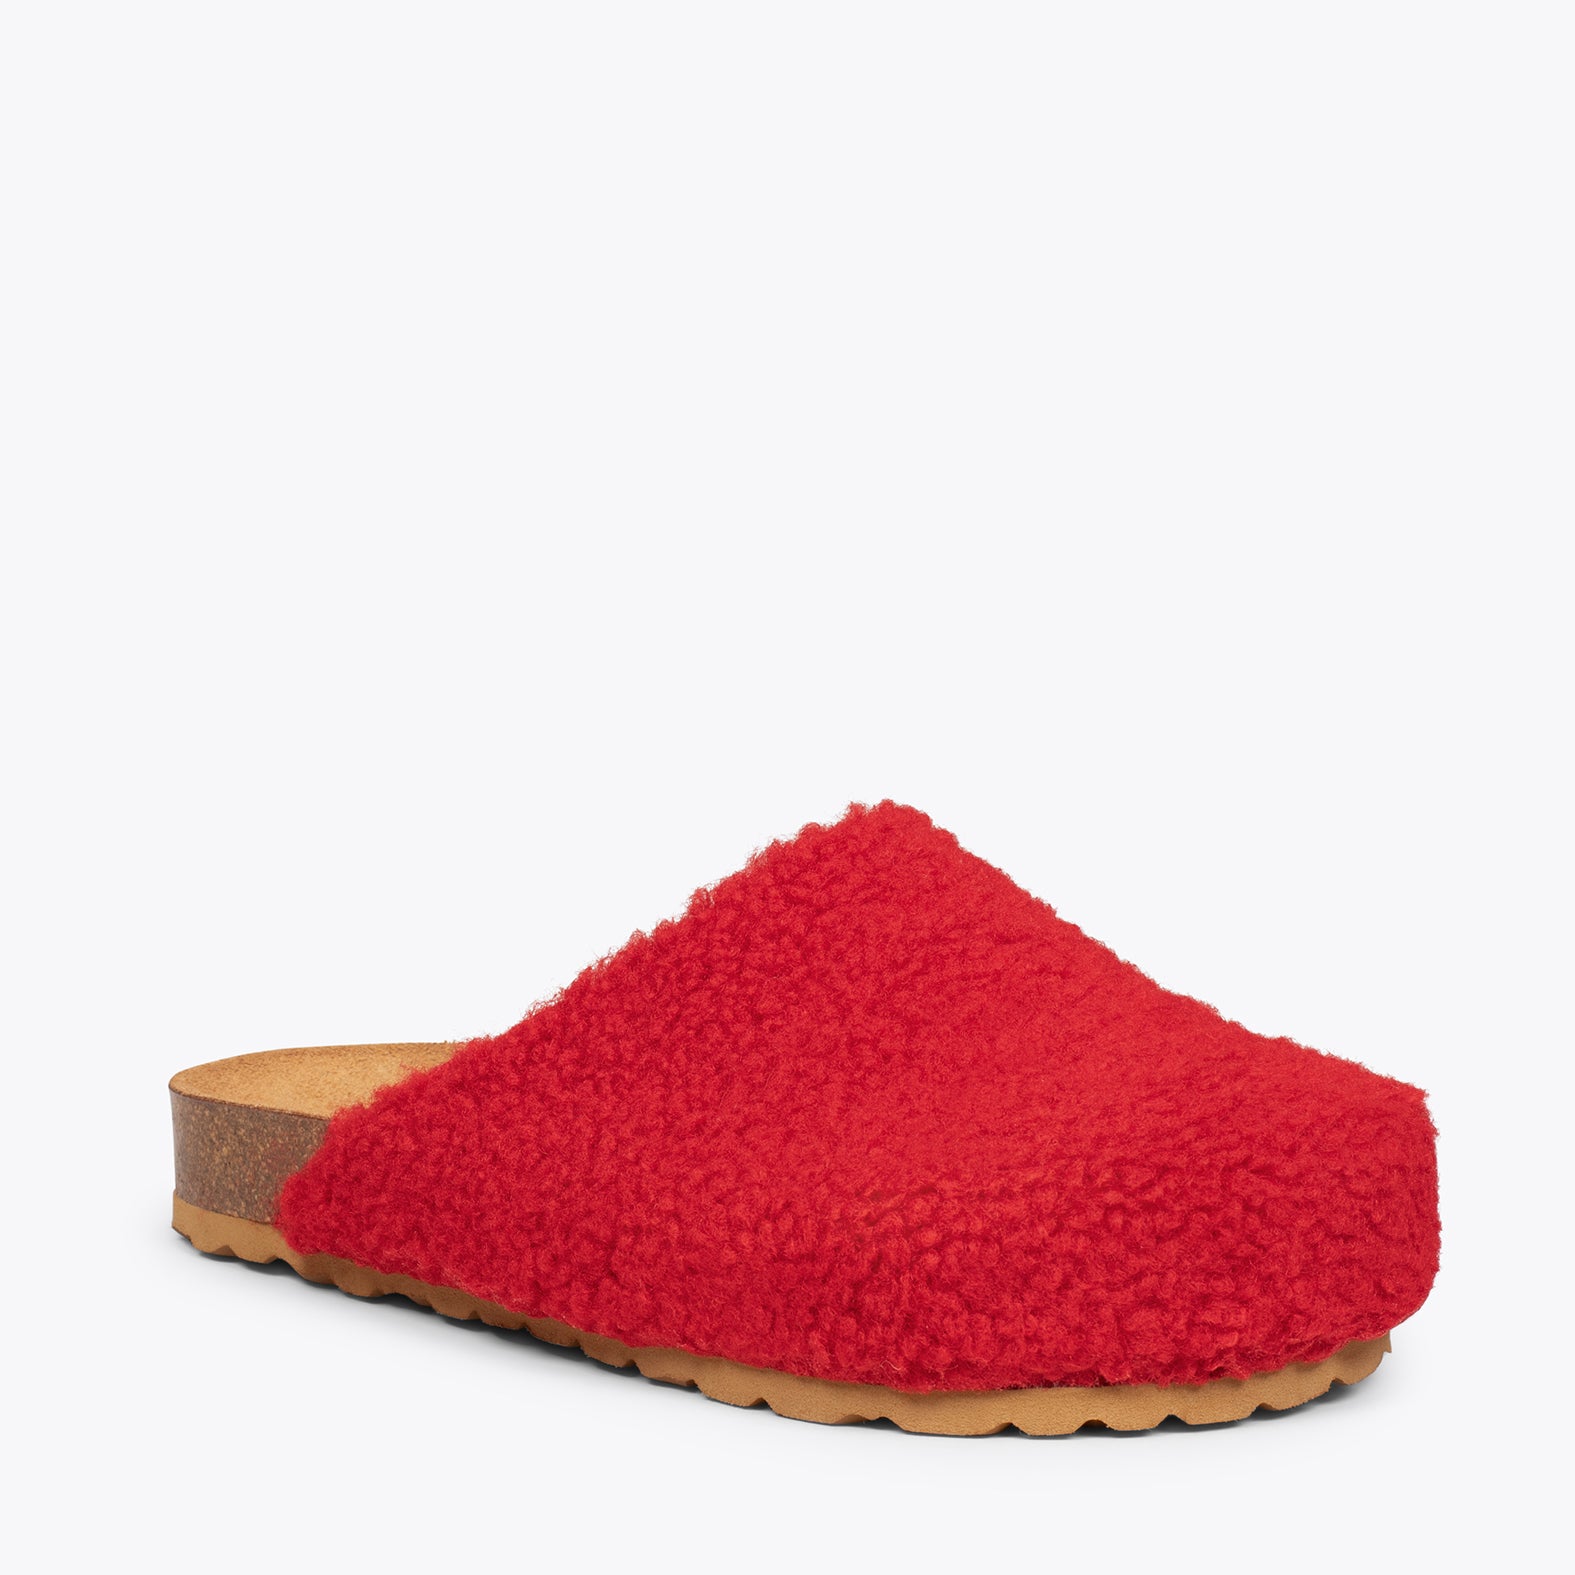 DREAMING - Chaussons fourrure mouton ROUGE